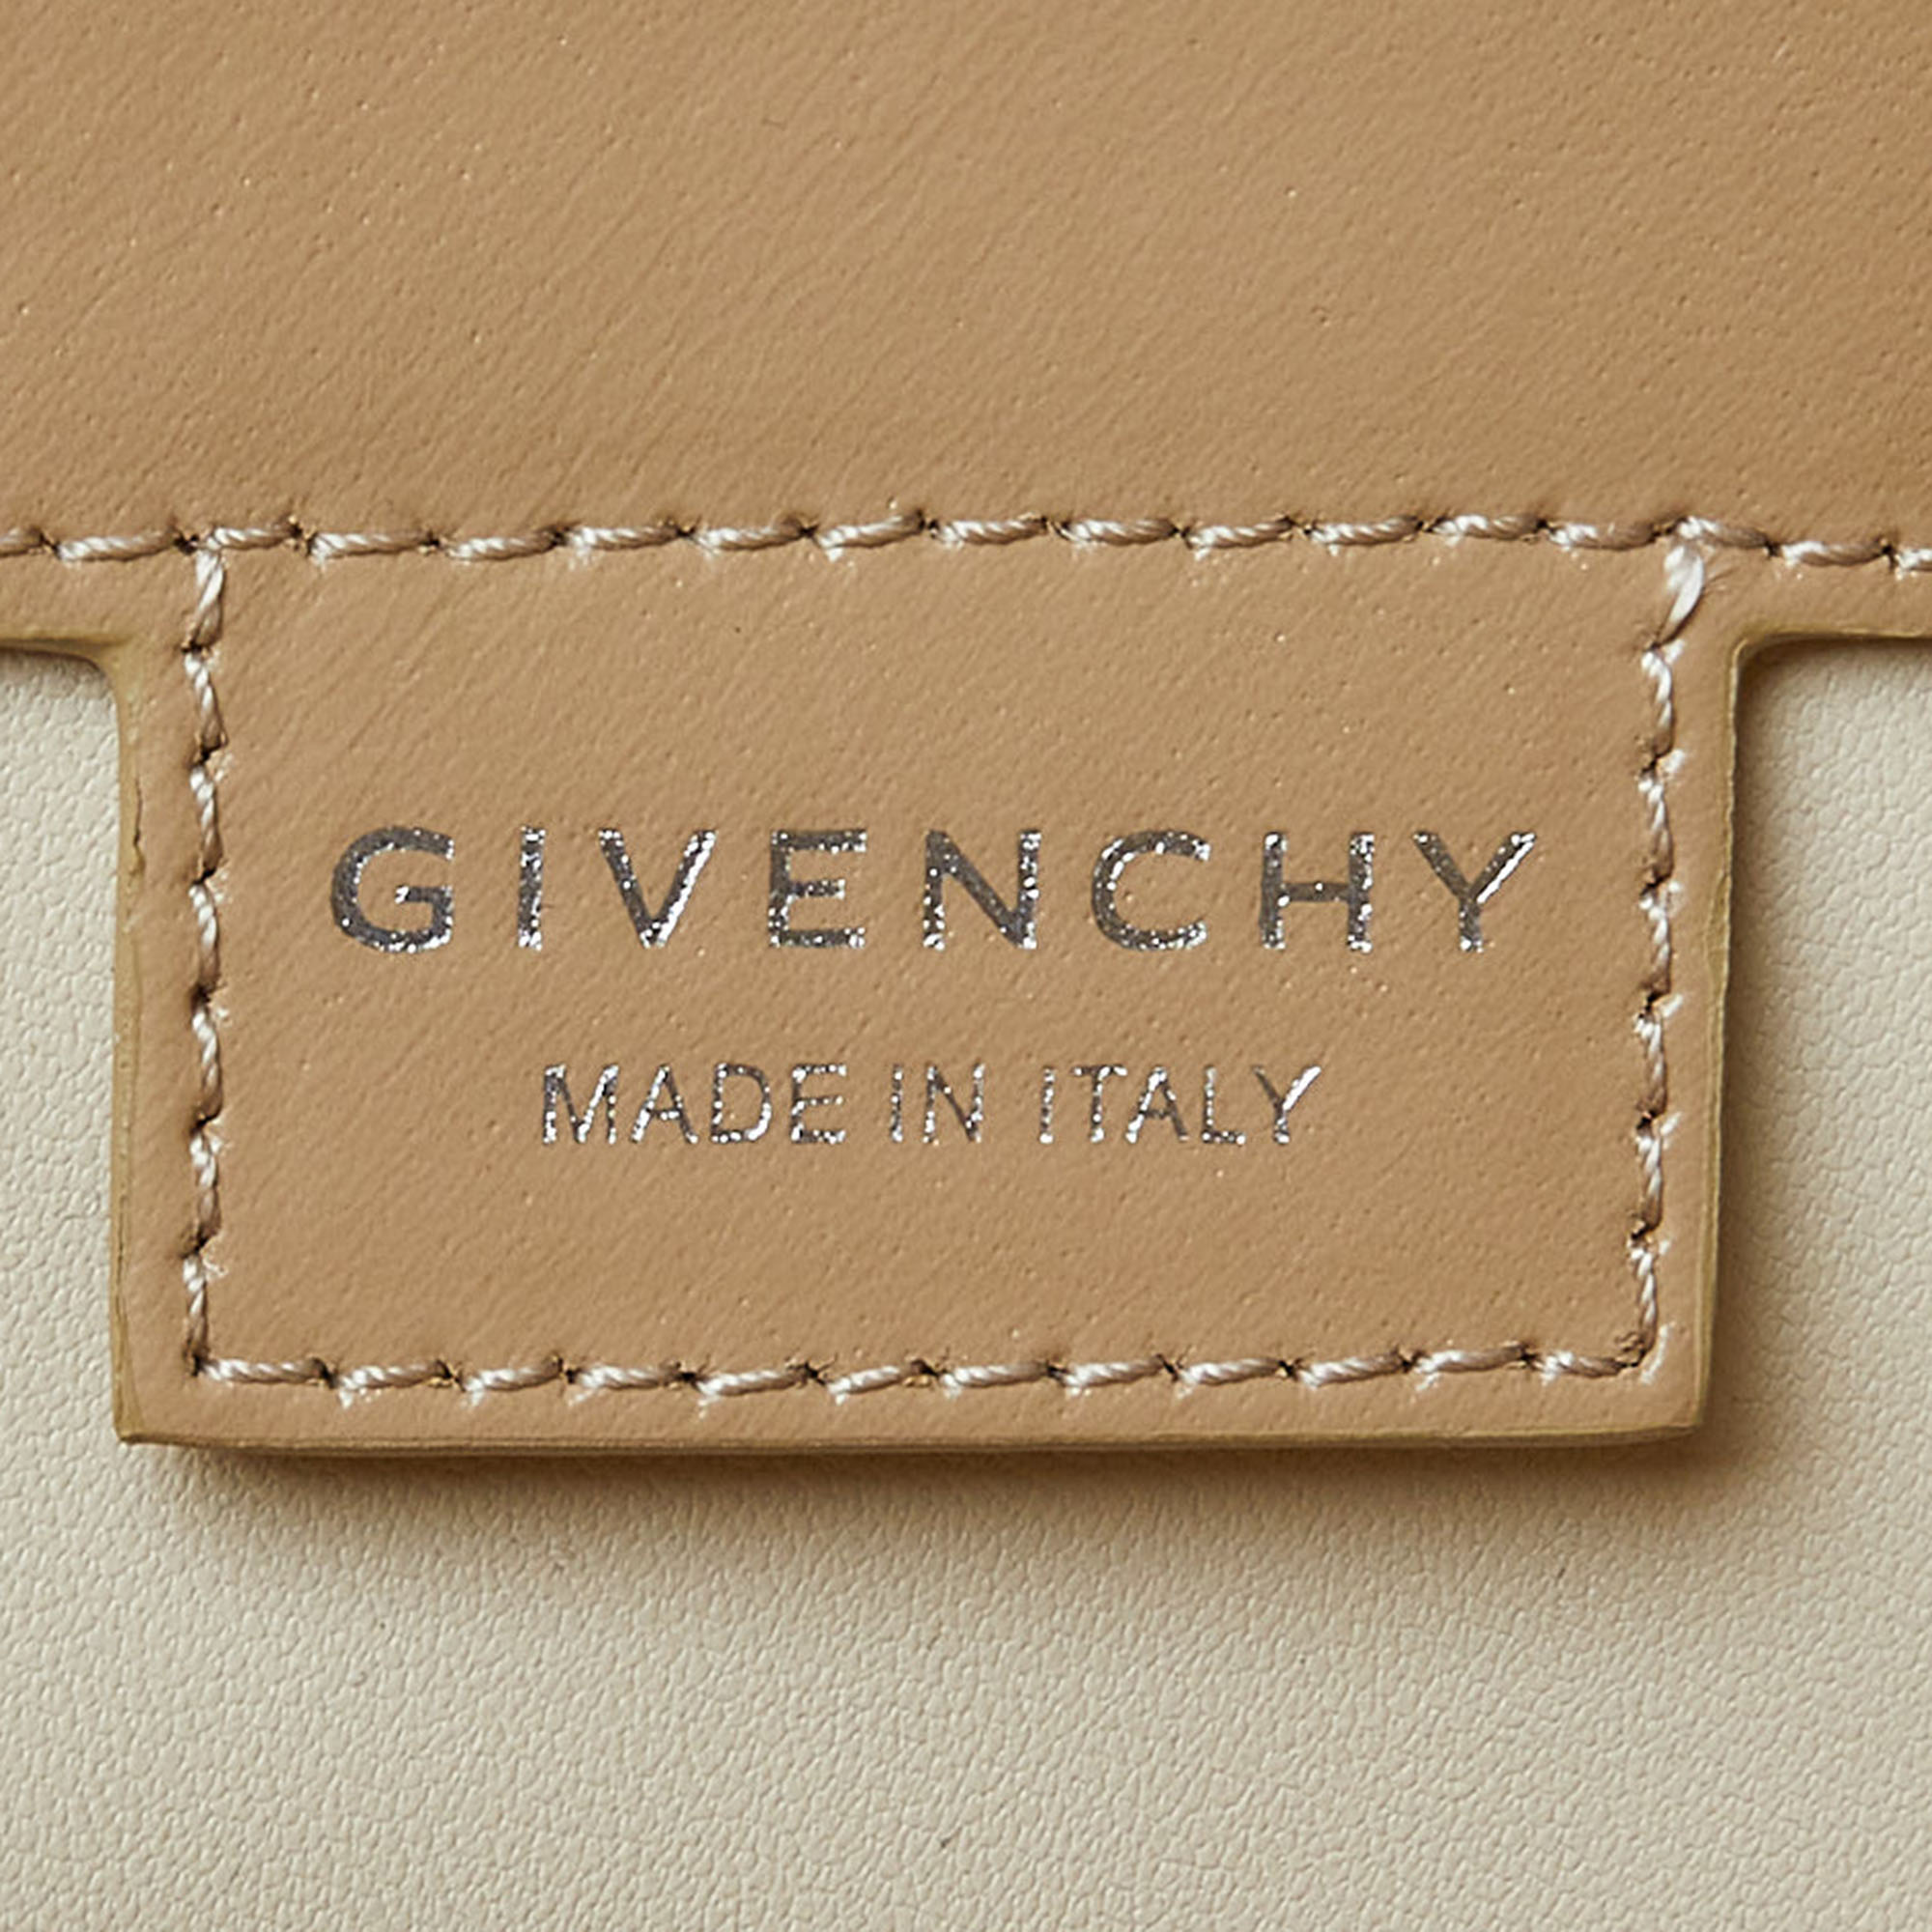 Givenchy Cream Glossy Leather Chain Cut Out Bag